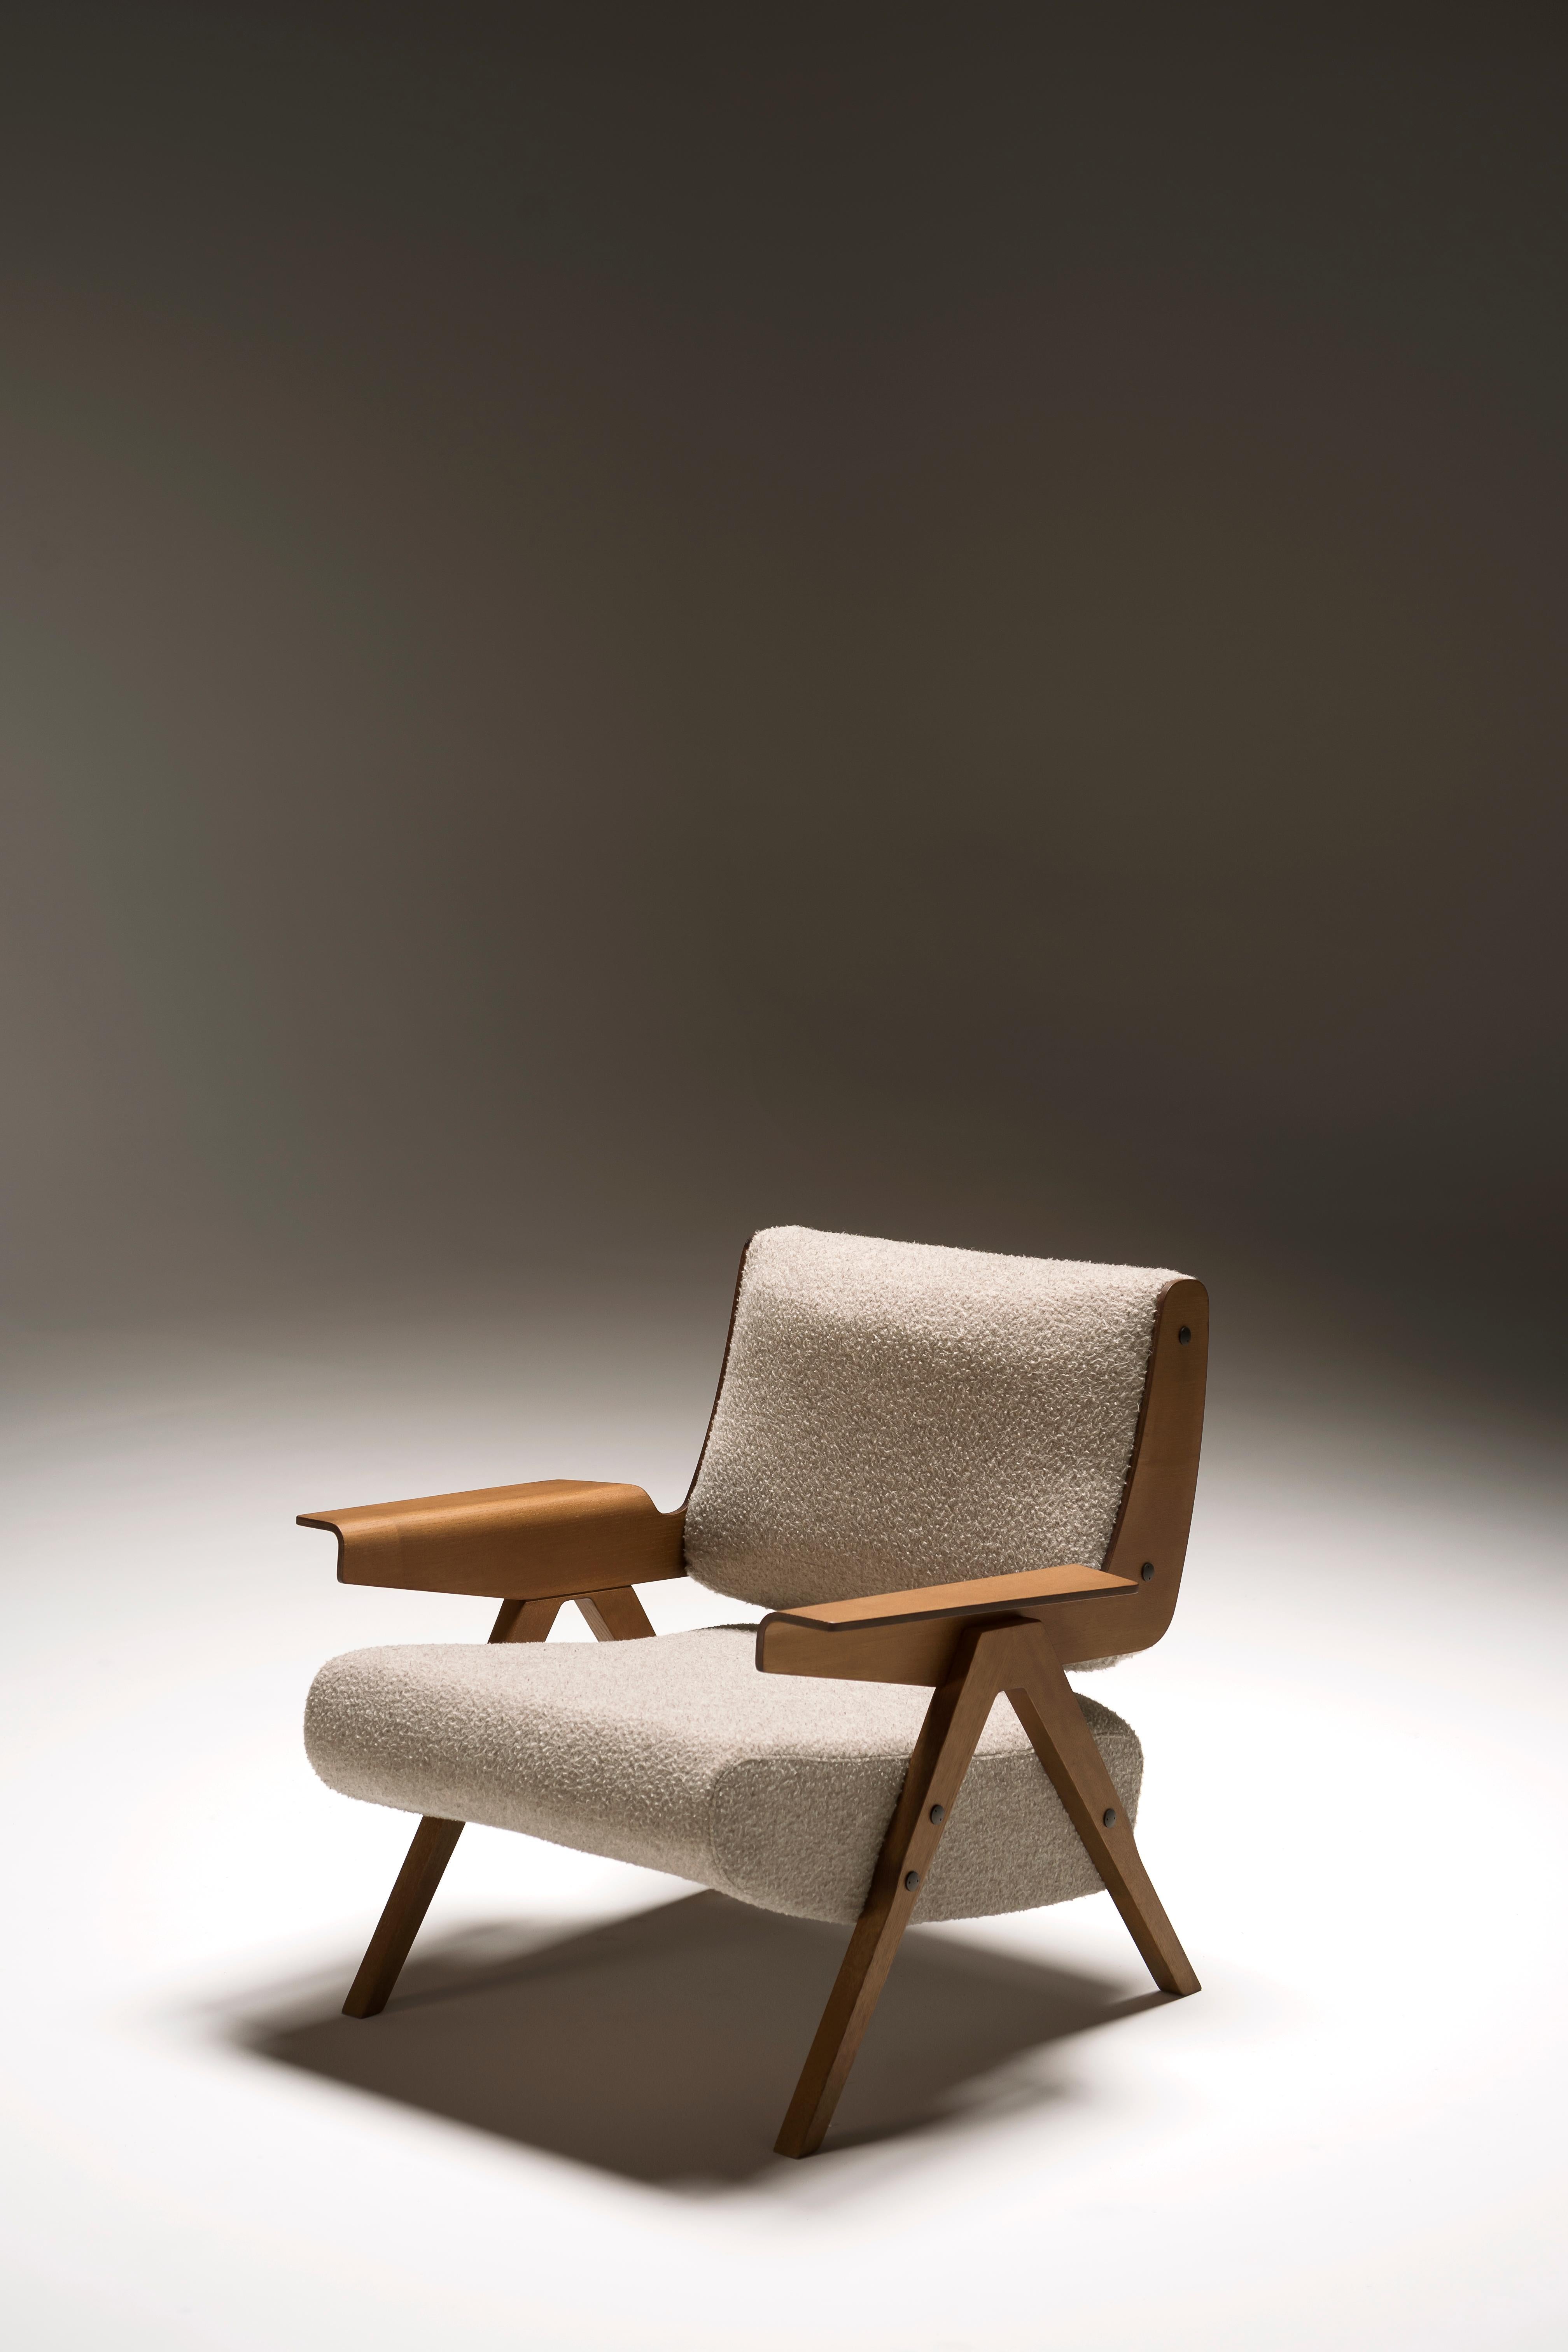 Lina is a re-edition of one of the earliest projects designed by Gianfranco Frattini, one of the great masters of Italian design. Nominated in 1955 for the Compasso d’oro, the armchair features an unusual wood frame that lends it a solid, yet